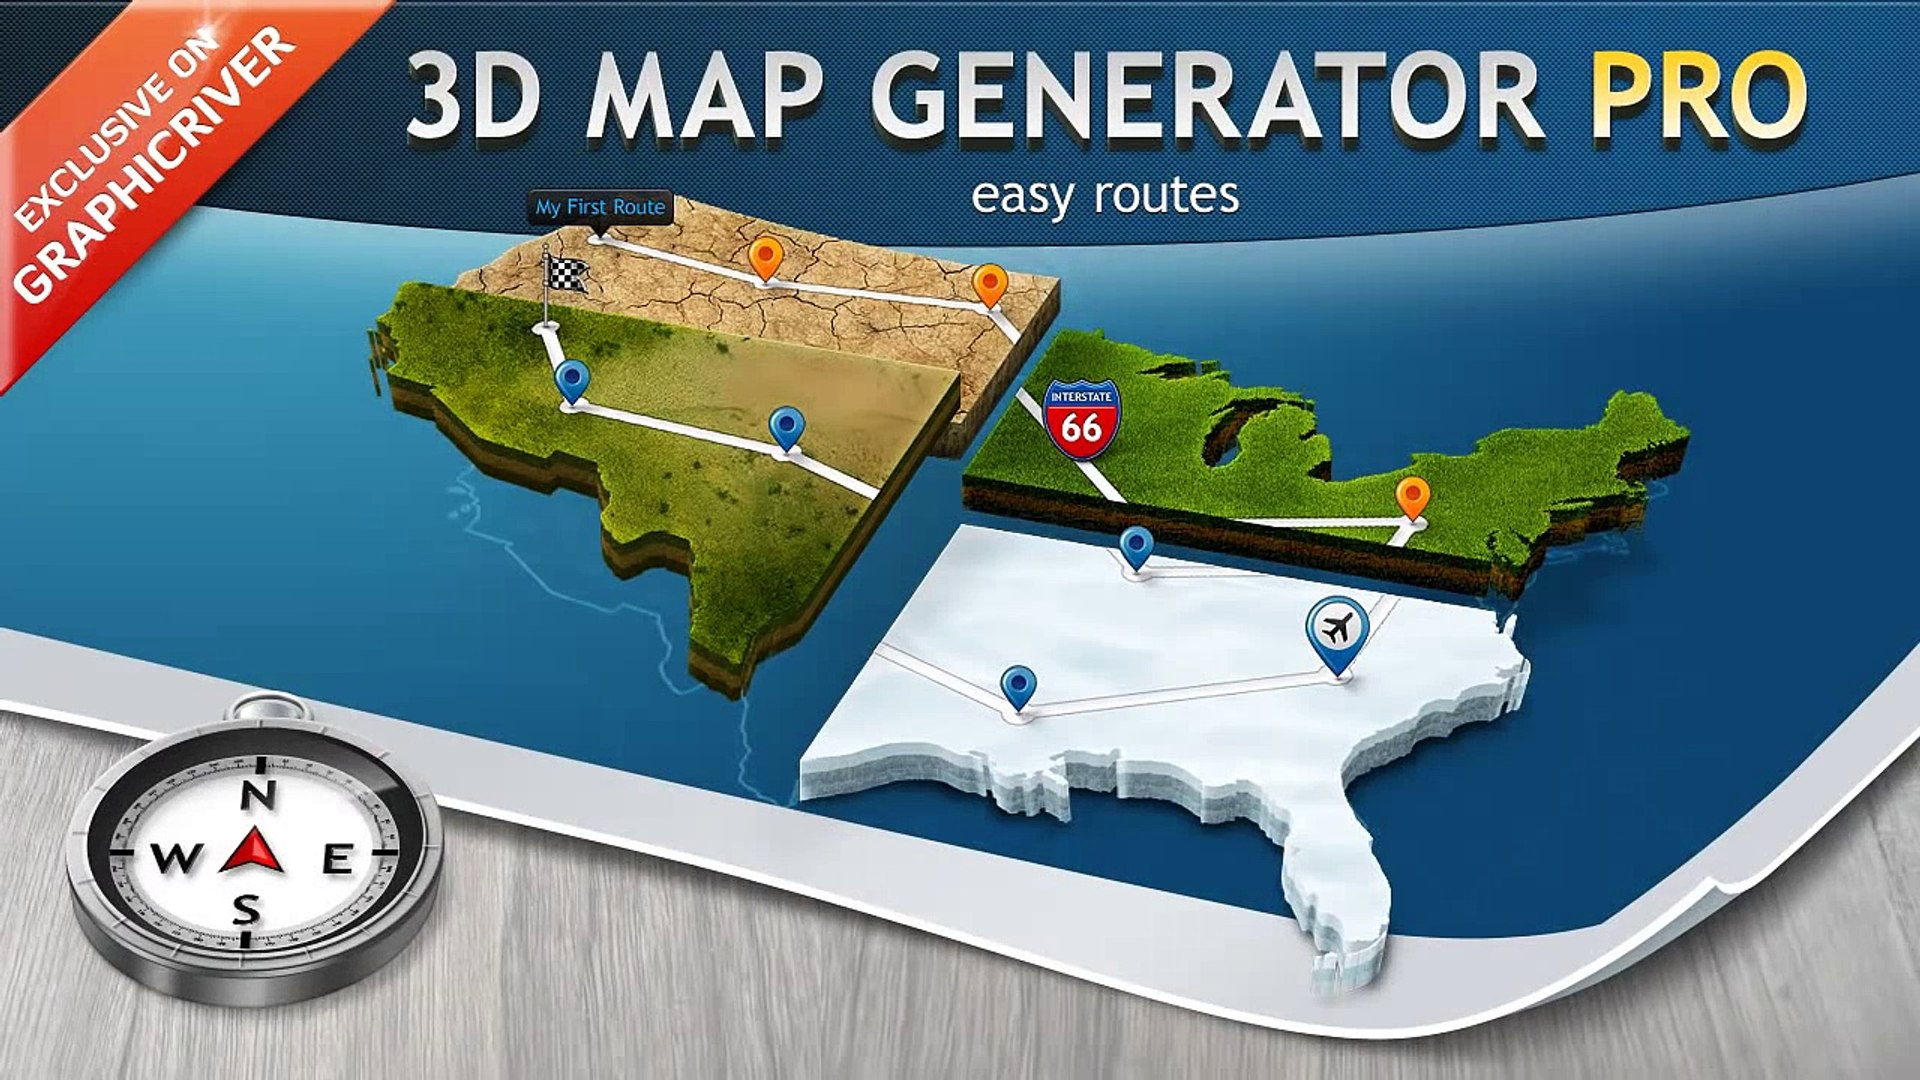 Tutorial - From Google Screenshot to 3D Map - 3D Map Generator Pro - video  Dailymotion